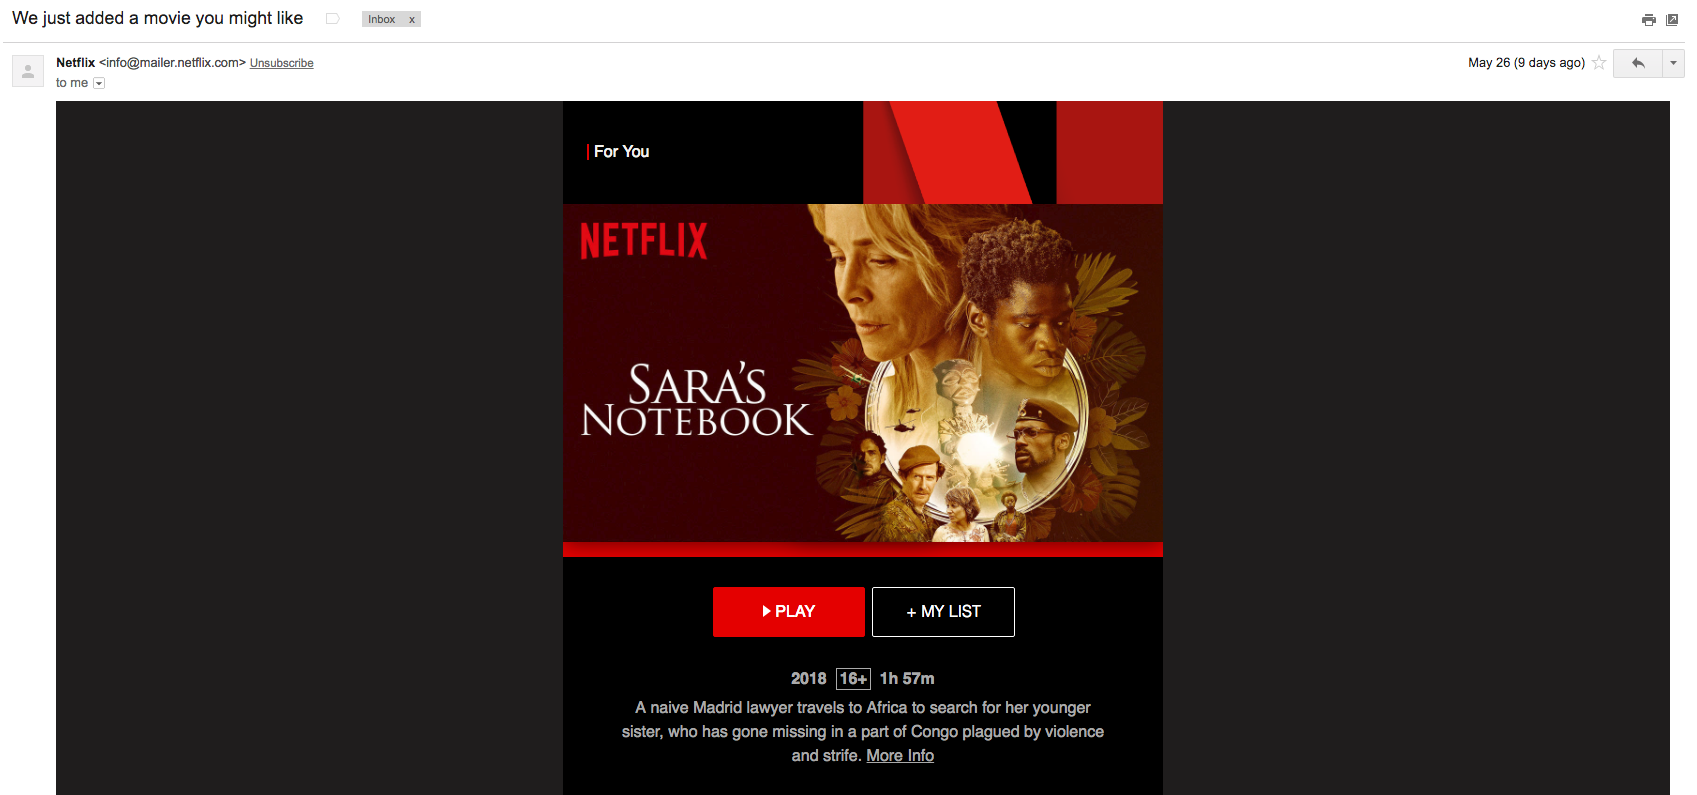 Automated email from Netflix